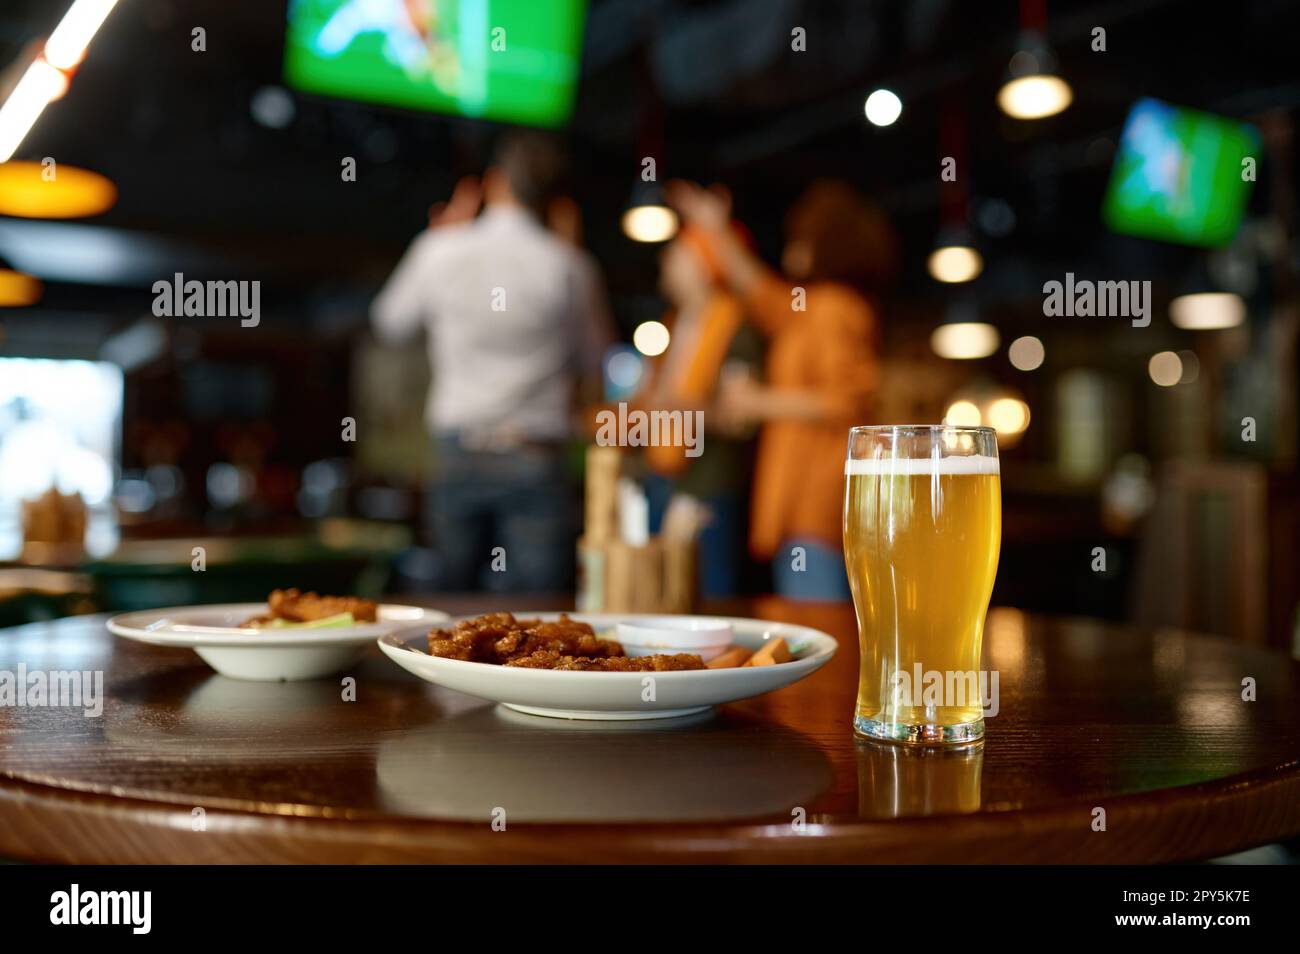 Beer glass and fast food snack on table in sports bar Stock Photo